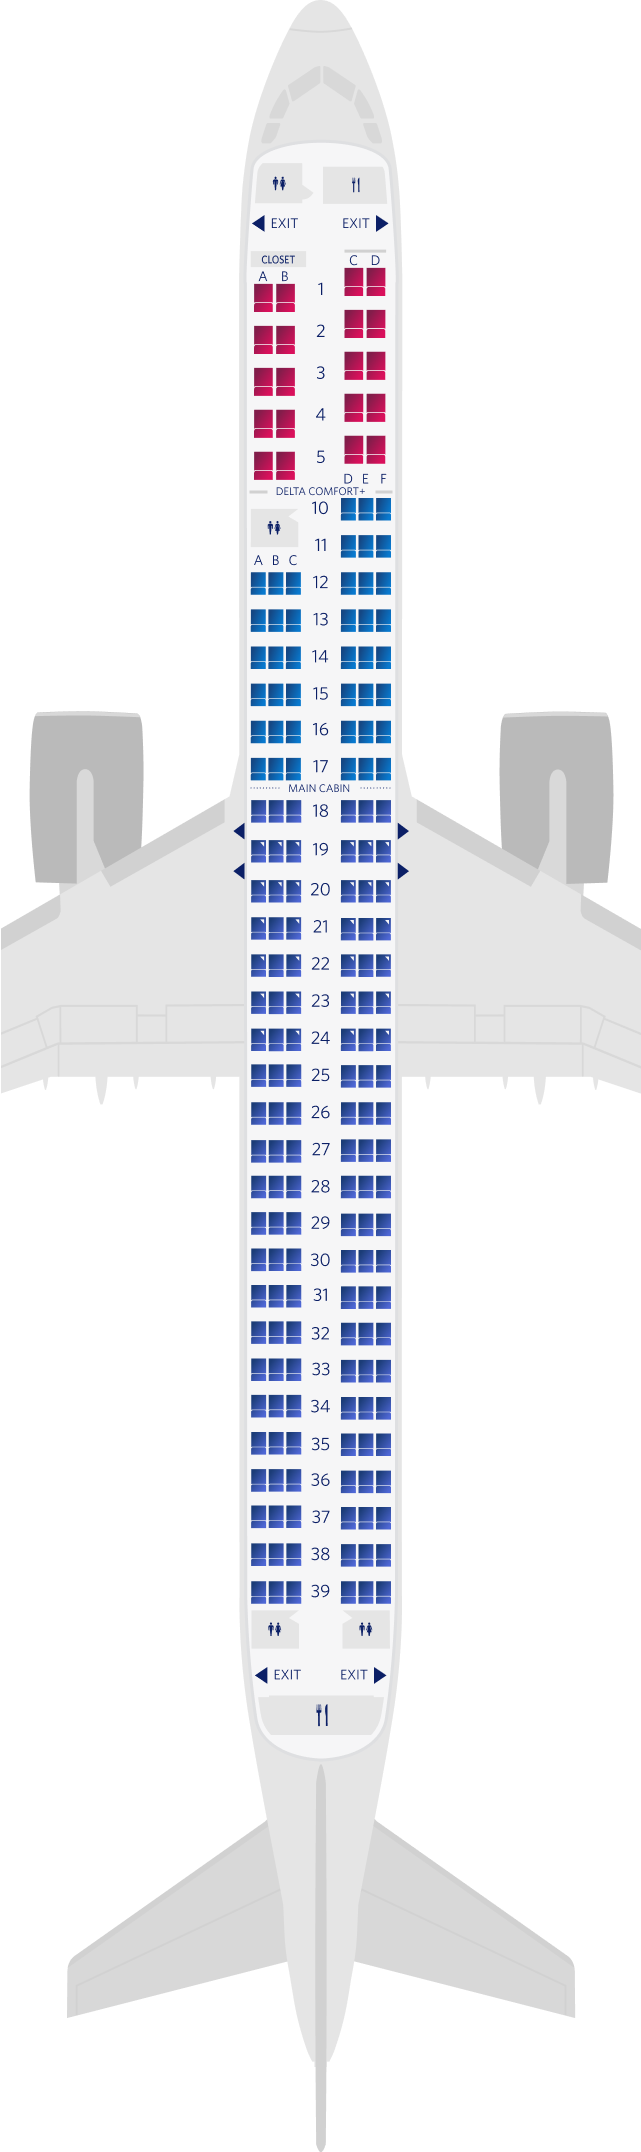 Airbus A321neo 3-Cabin Seat Map